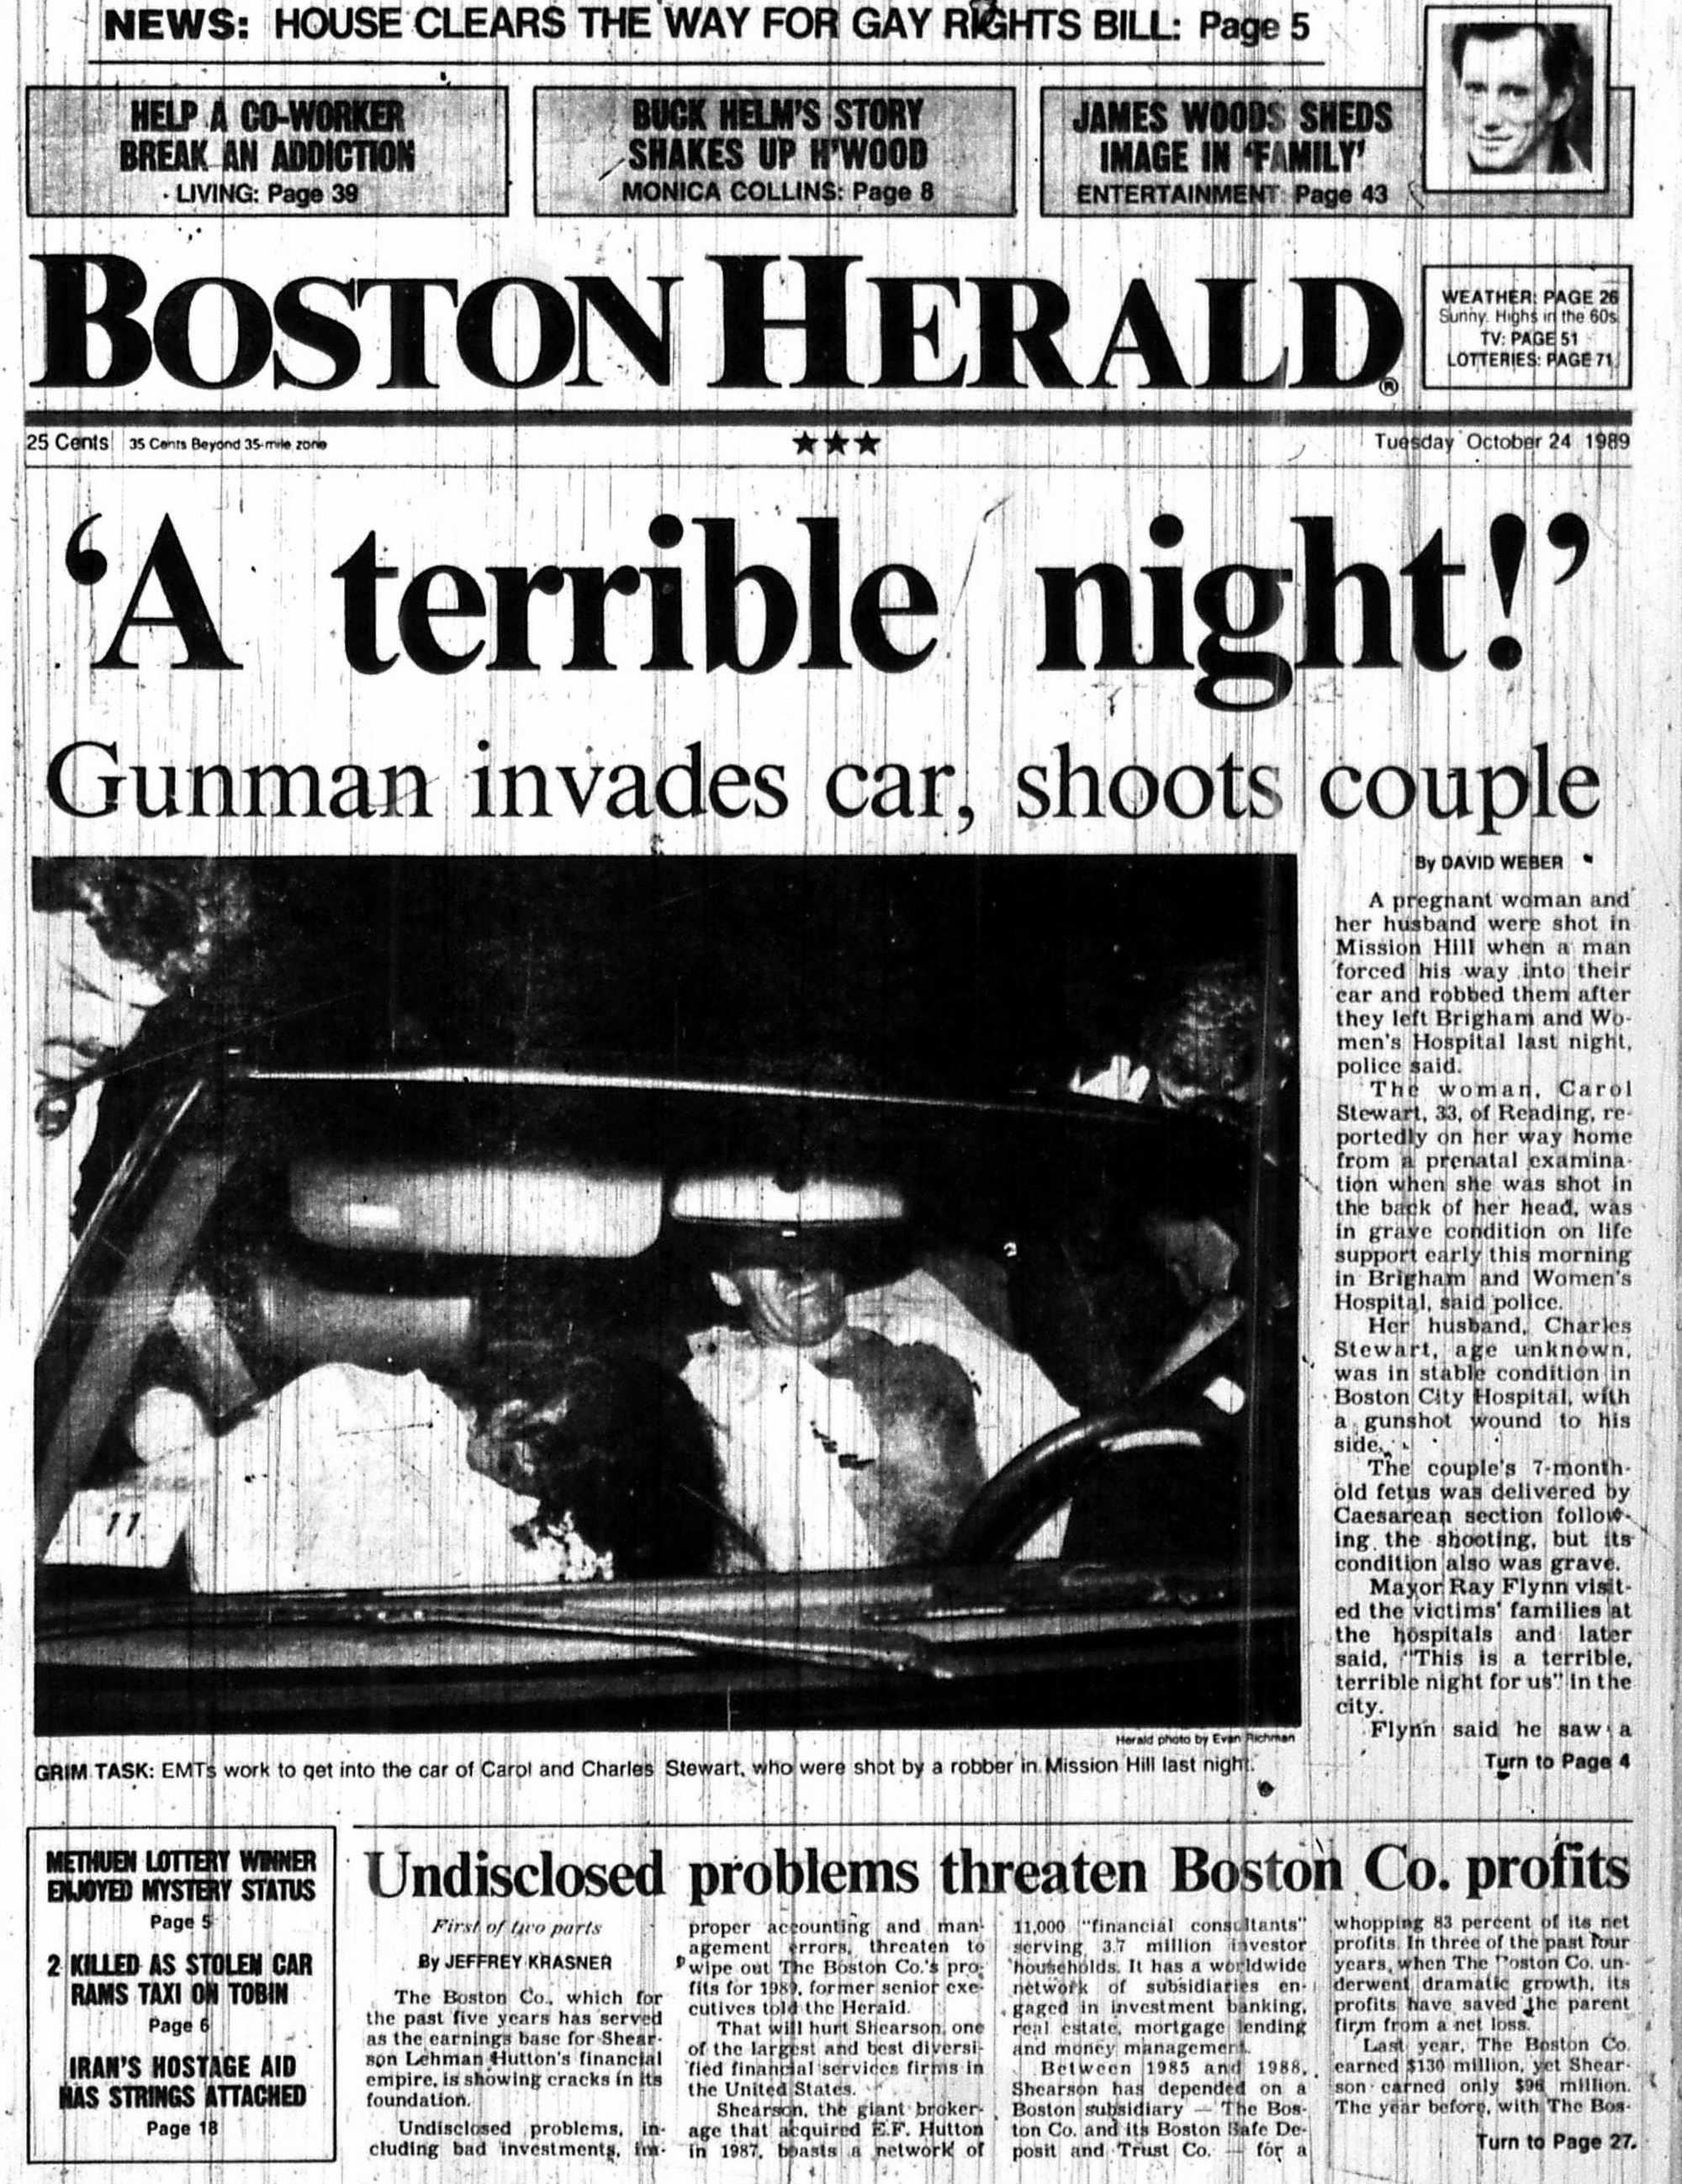 The front page of the Boston Herald on Oct. 24, 1989. 